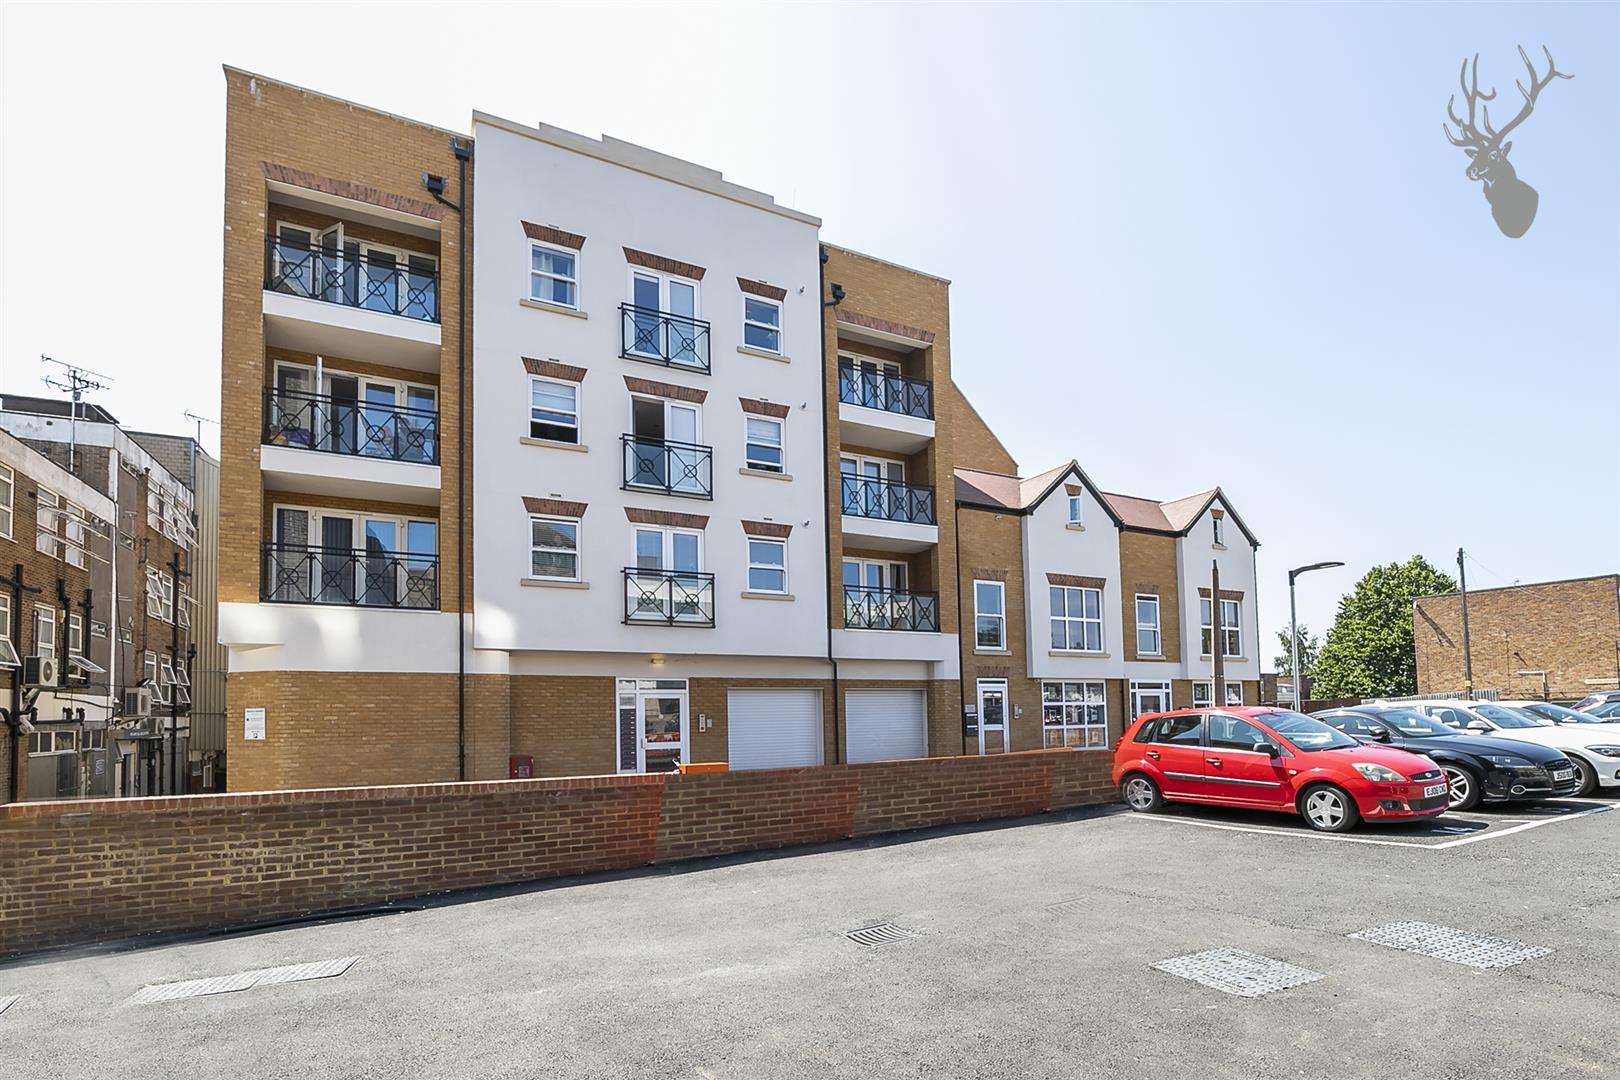 Similar Property: Flat in Brentwood